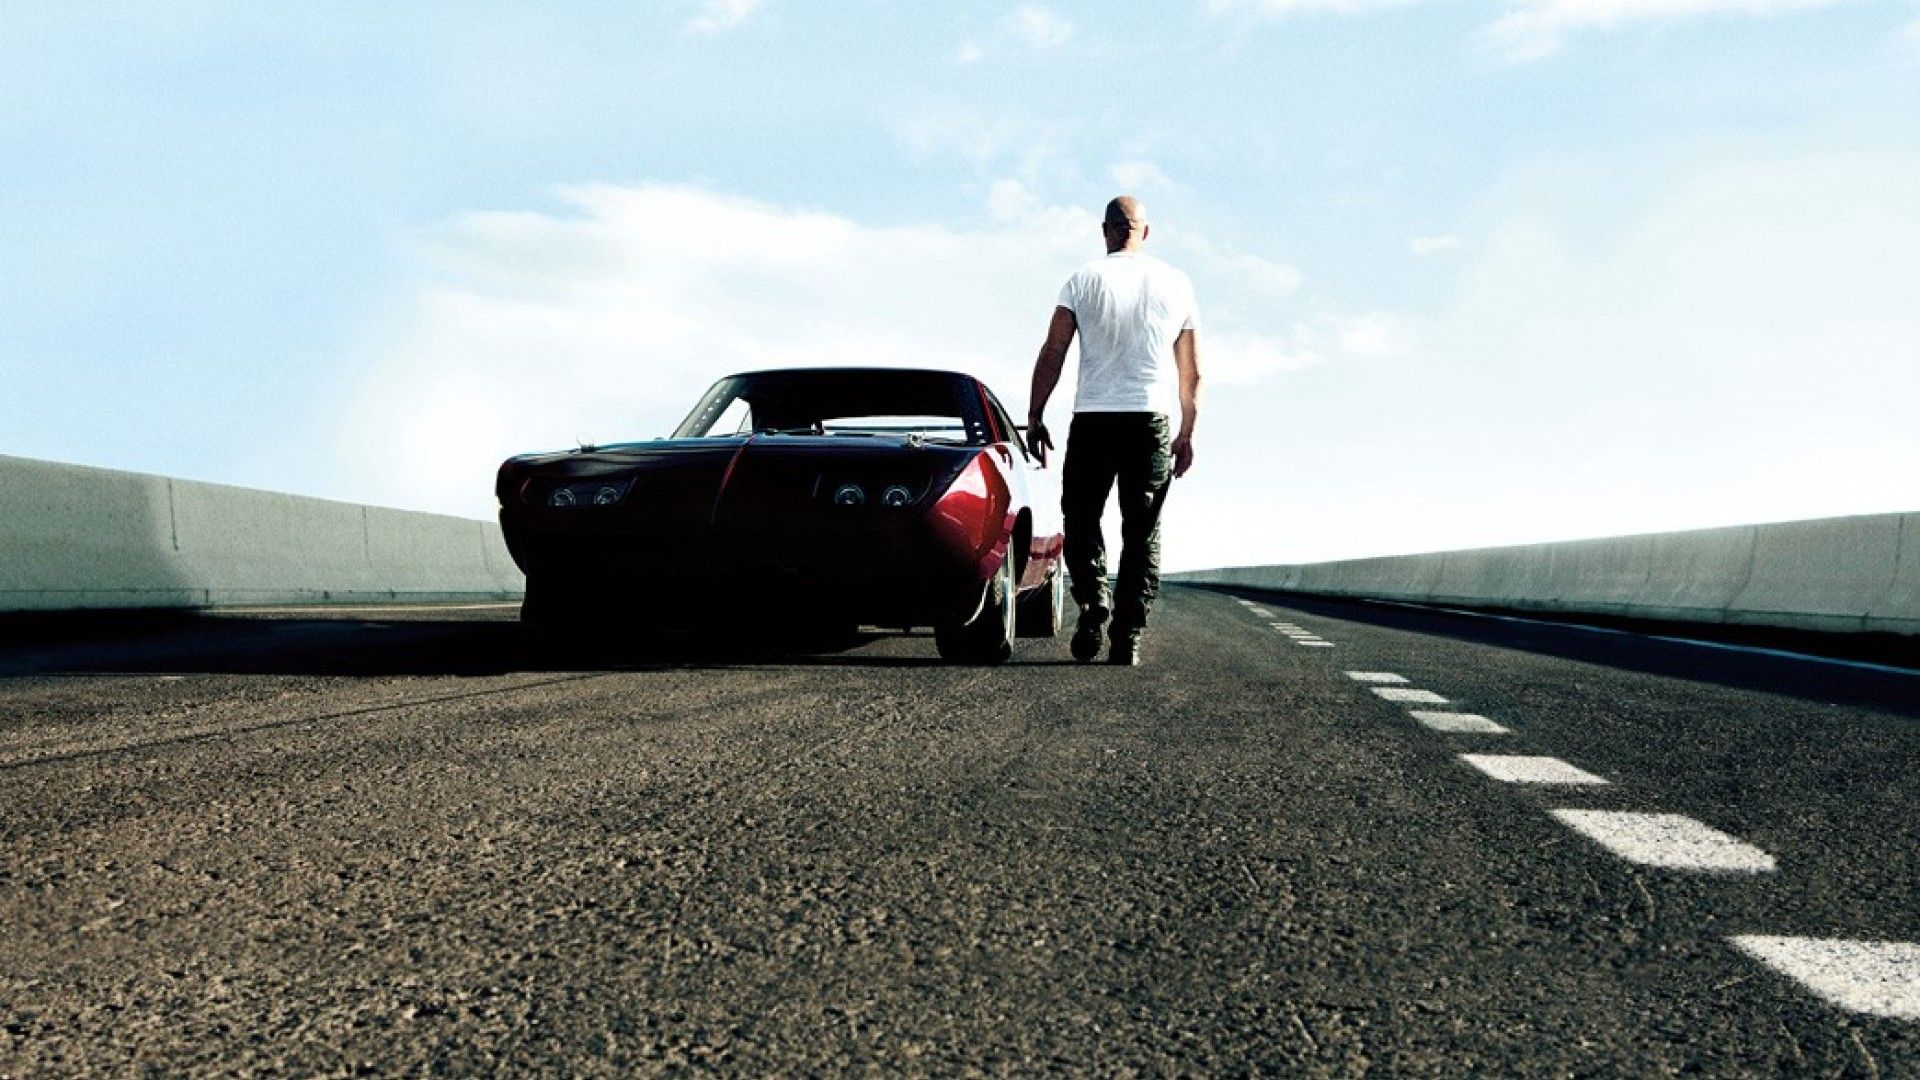 Fast and Furious Cars Vin Diesel - image #332